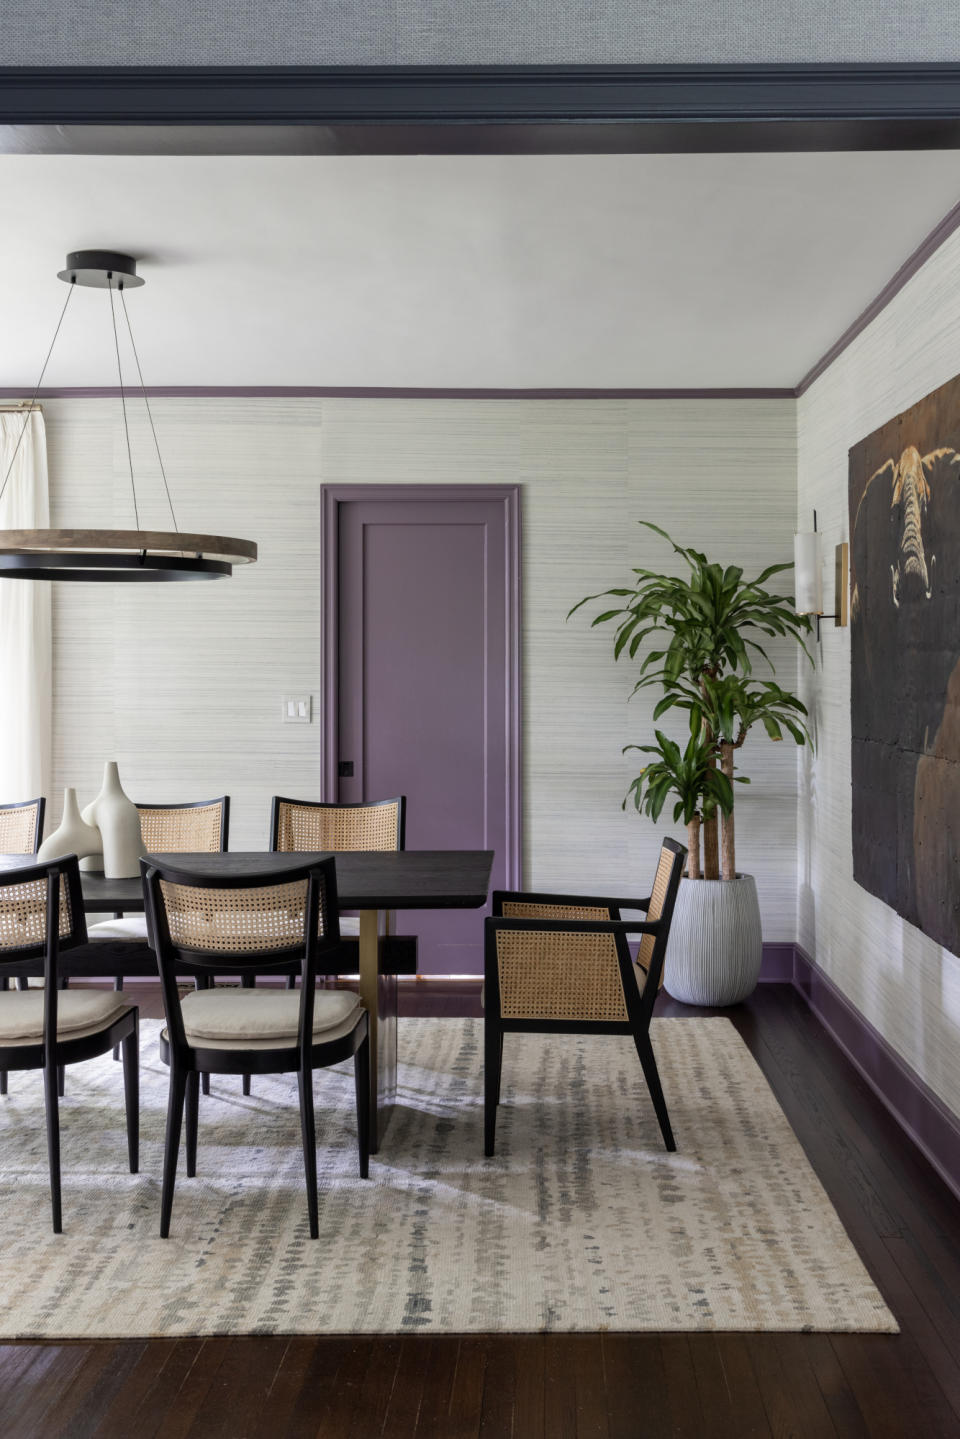 Dining room with dark wood flooring, neutral grasscloth wallpaper, black and cane dining chairs and purple painted woodwork